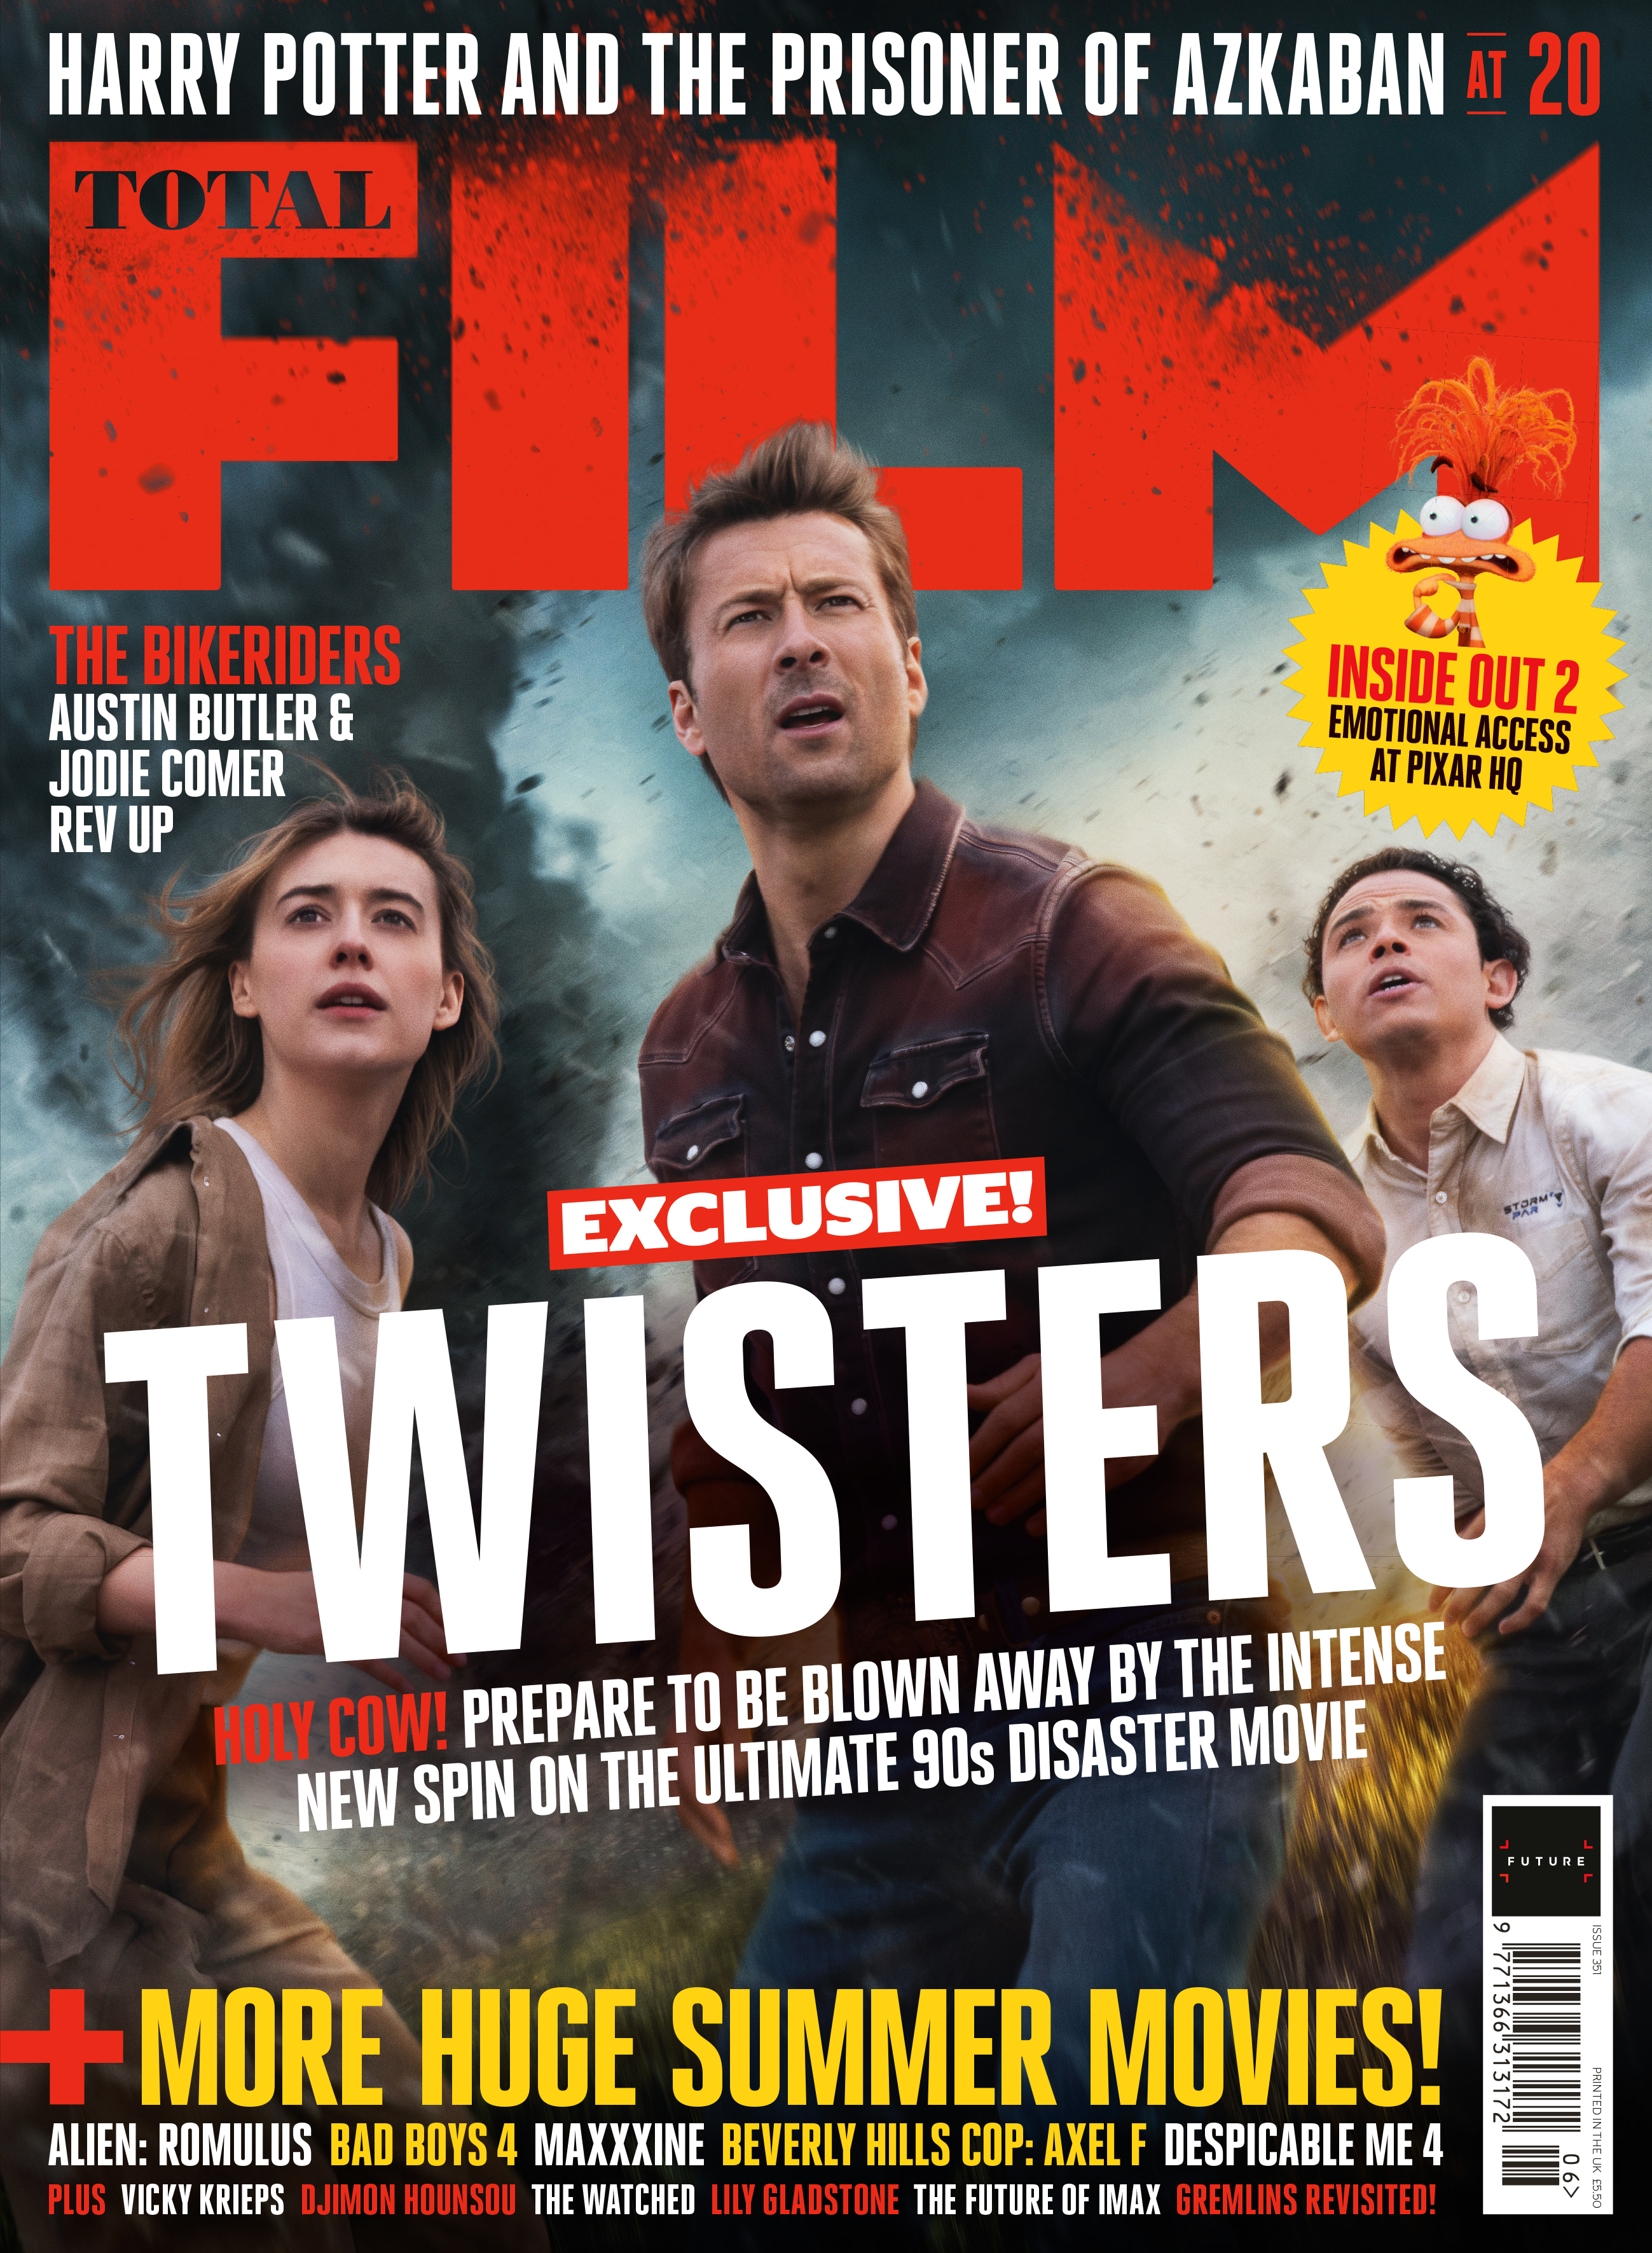 Glen Powell, Daisy Edgar-Jones and Anthony Ramos on the newsstand cover of Total Film's Twisters issue